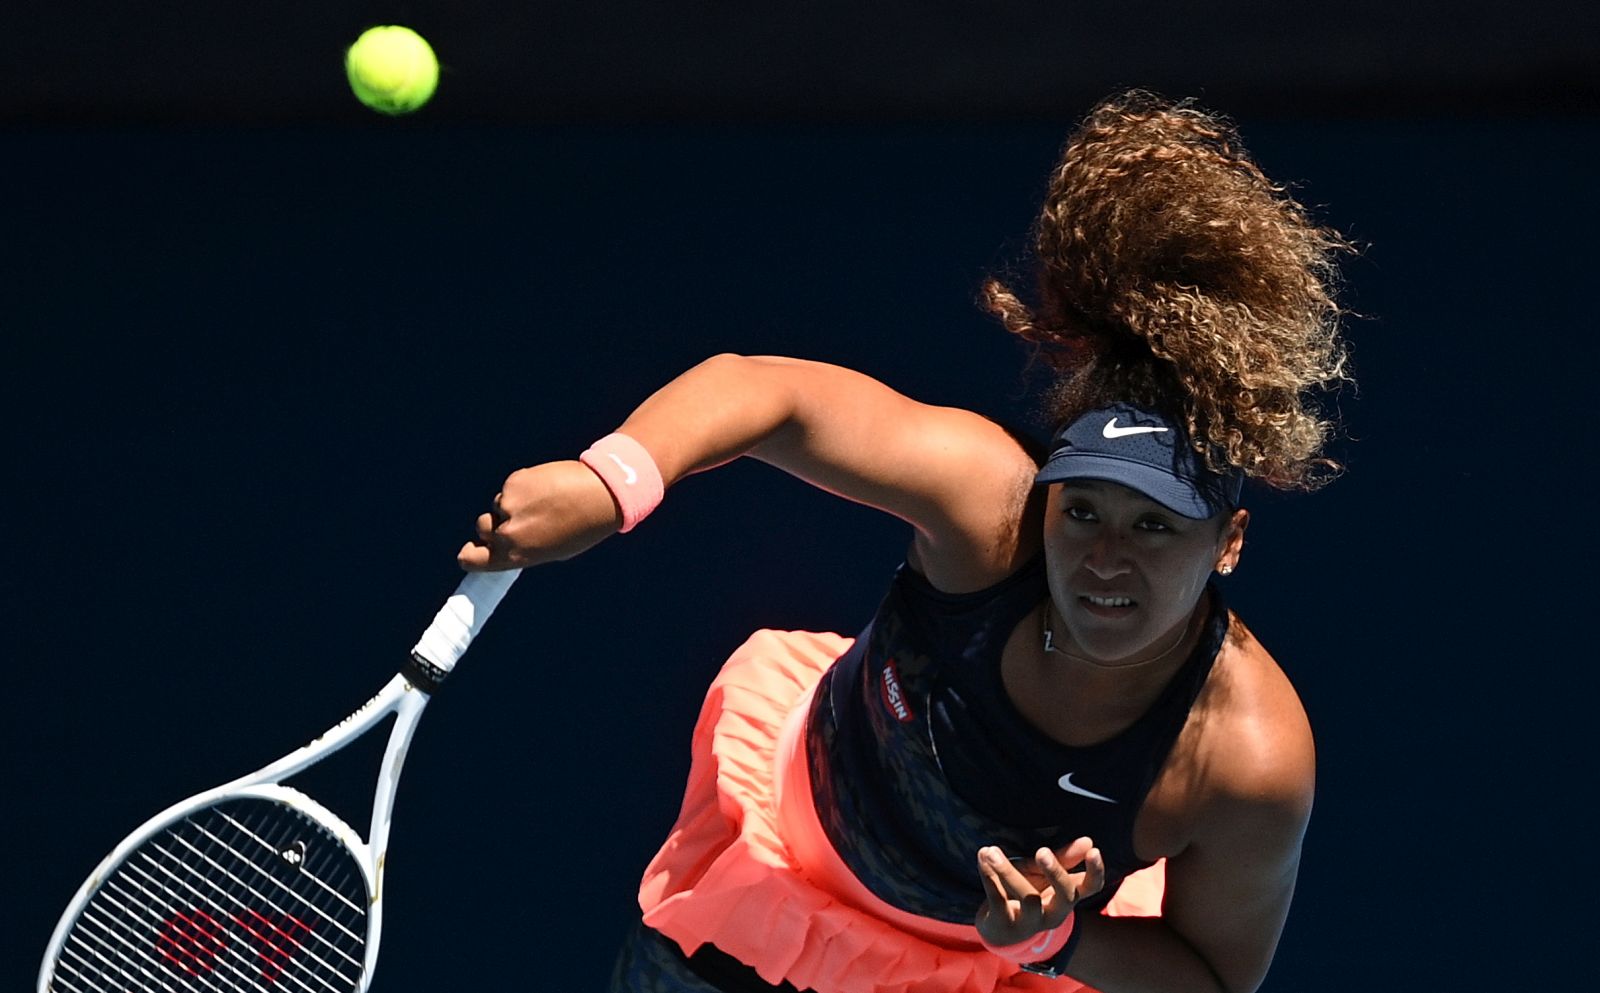 epa09020200 Naomi Osaka of Japan in action during her Women's singles semifinals match against Serena Williams of the United States on Day 11 of the Australian Open Grand Slam tennis tournament at Melbourne Park in Melbourne, Australia, 18 February 2021.  EPA/DEAN LEWINS AUSTRALIA AND NEW ZEALAND OUT